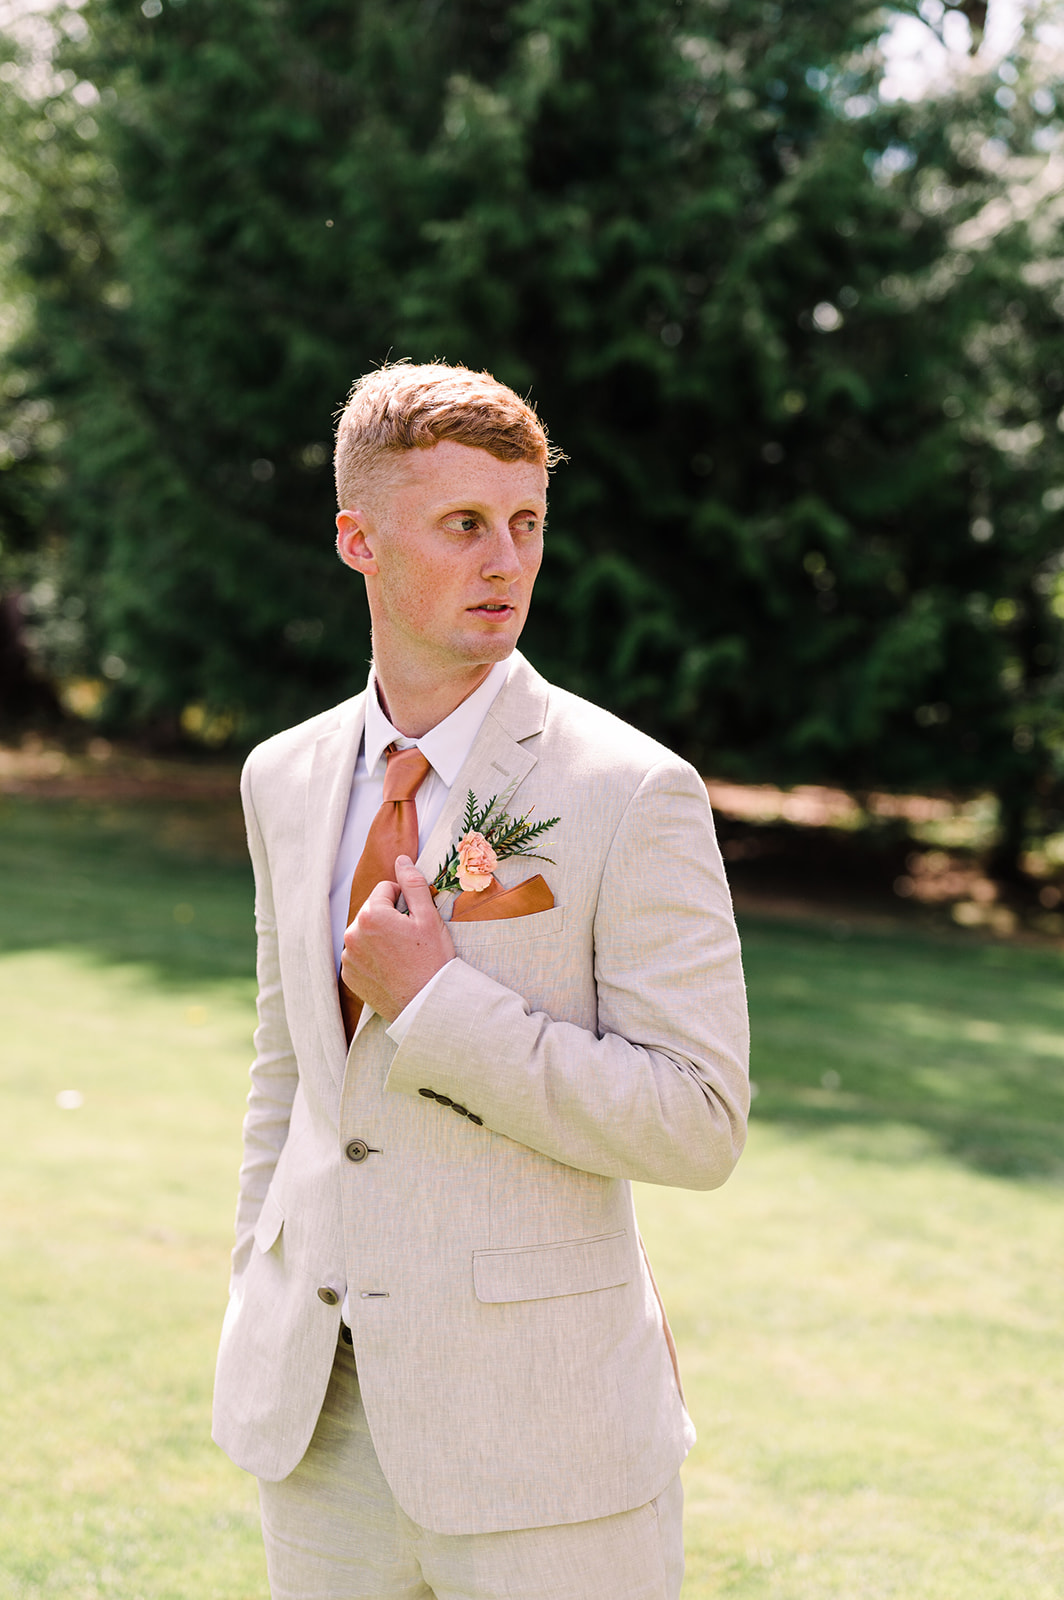 Neutral suits for the groom